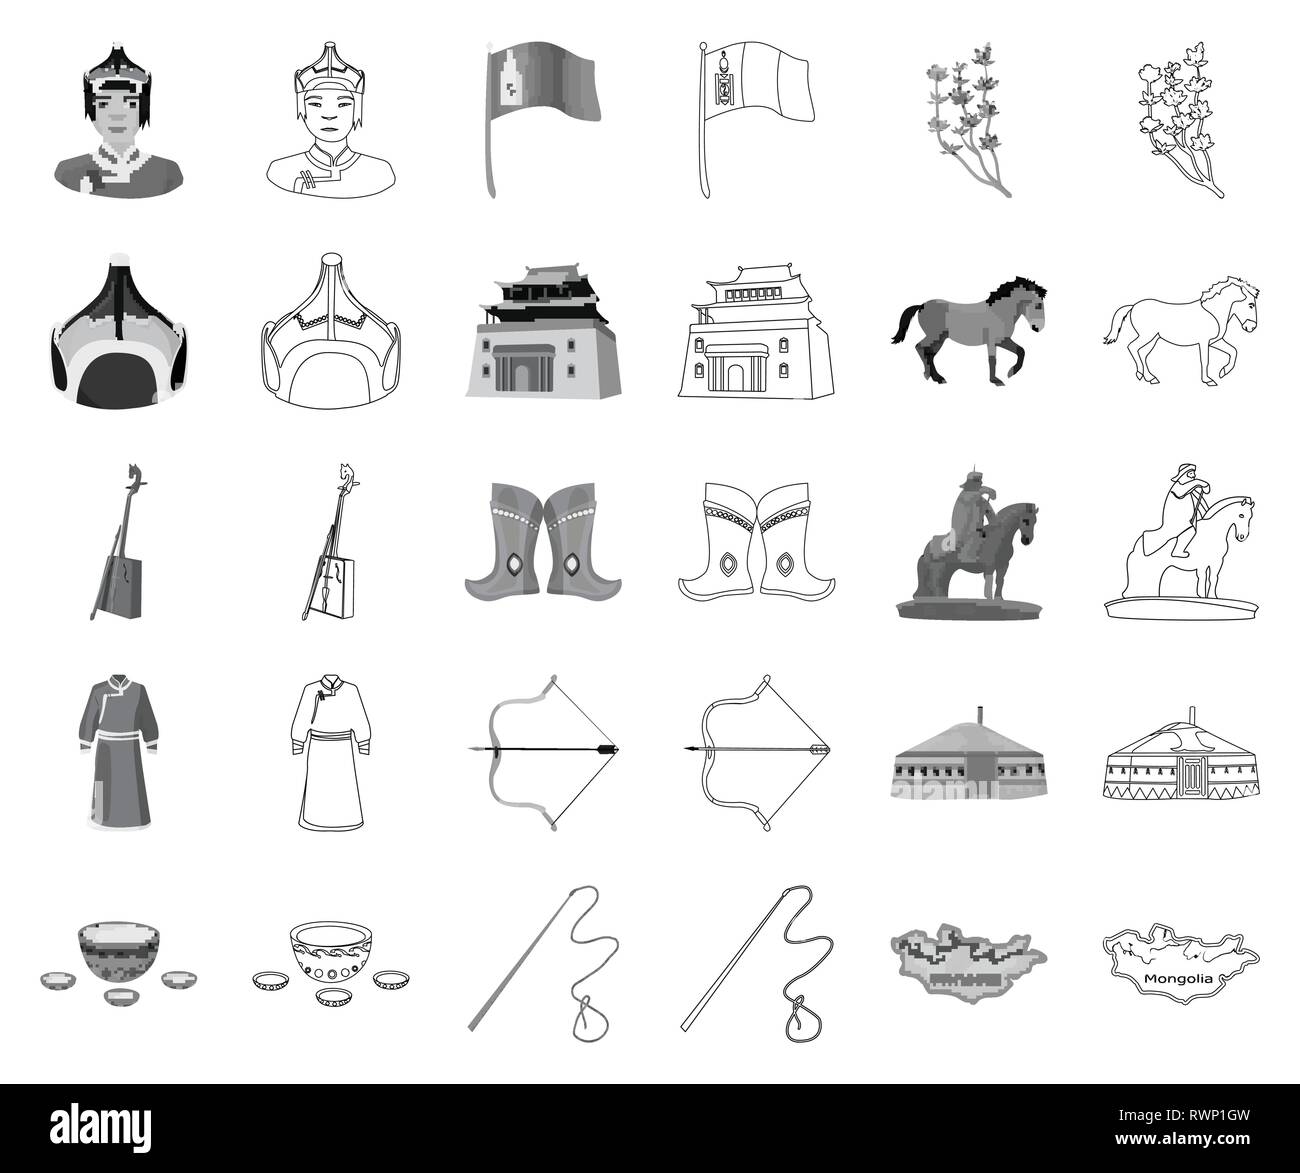 arms,arrow,belt,bow,buddhism,building,cashmere,coat,collection,country,culture,flag,flower,fur,genghis,gutuly,headdress,horse,hudak,icon,illustration,instrument,khan,kialis,kumis,landmark,leather,map,monastery,mongol,mongolia,monochrome,outline,monument,musical,nature,religion,robe,set,shoes,sign,spear,temple,territory,tradition,travel,vector,whip,wool,yurt Vector Vectors , Stock Vector